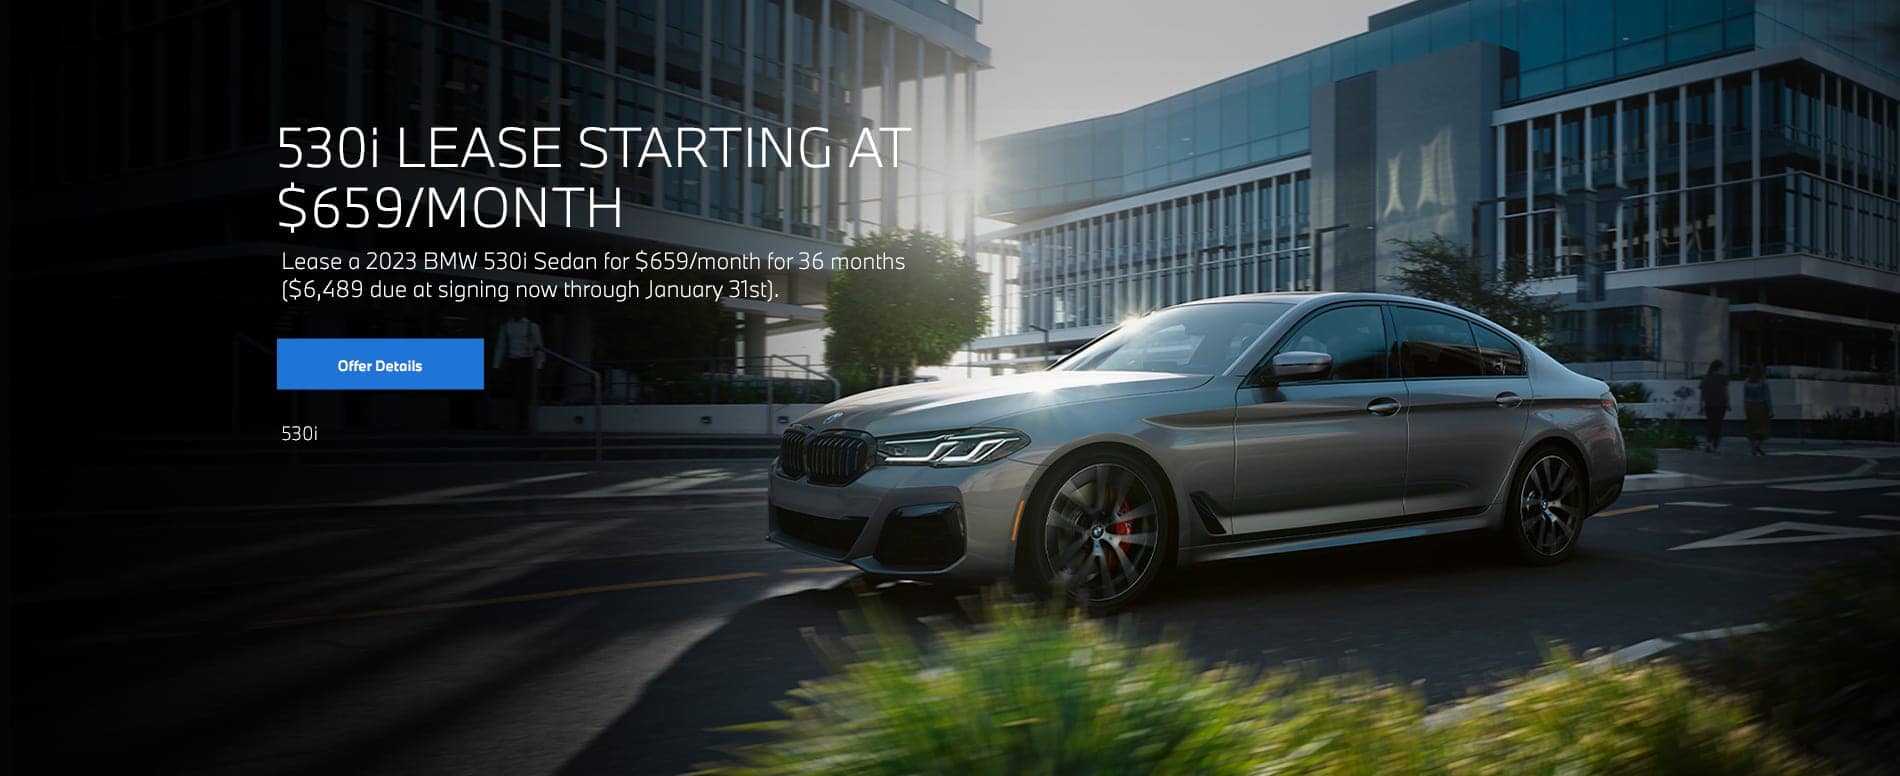 2023 530i Sedan lease starting at $659 per month for 36 months